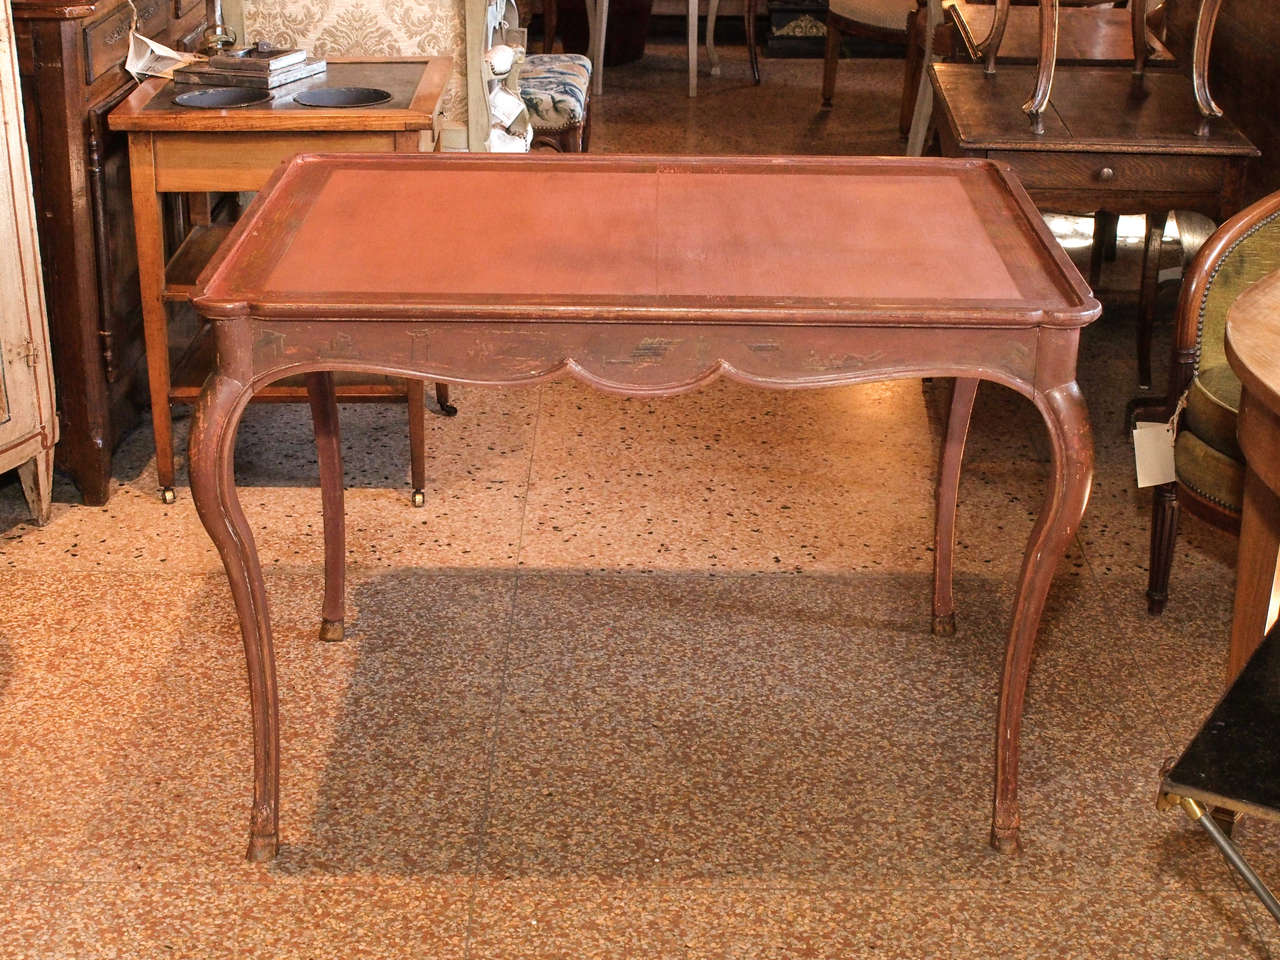 Circa 1920, the top of the table is banded with a gold chinese border. The skirt and cabriole legs have faint decorative chinese motifs in the Jansen style